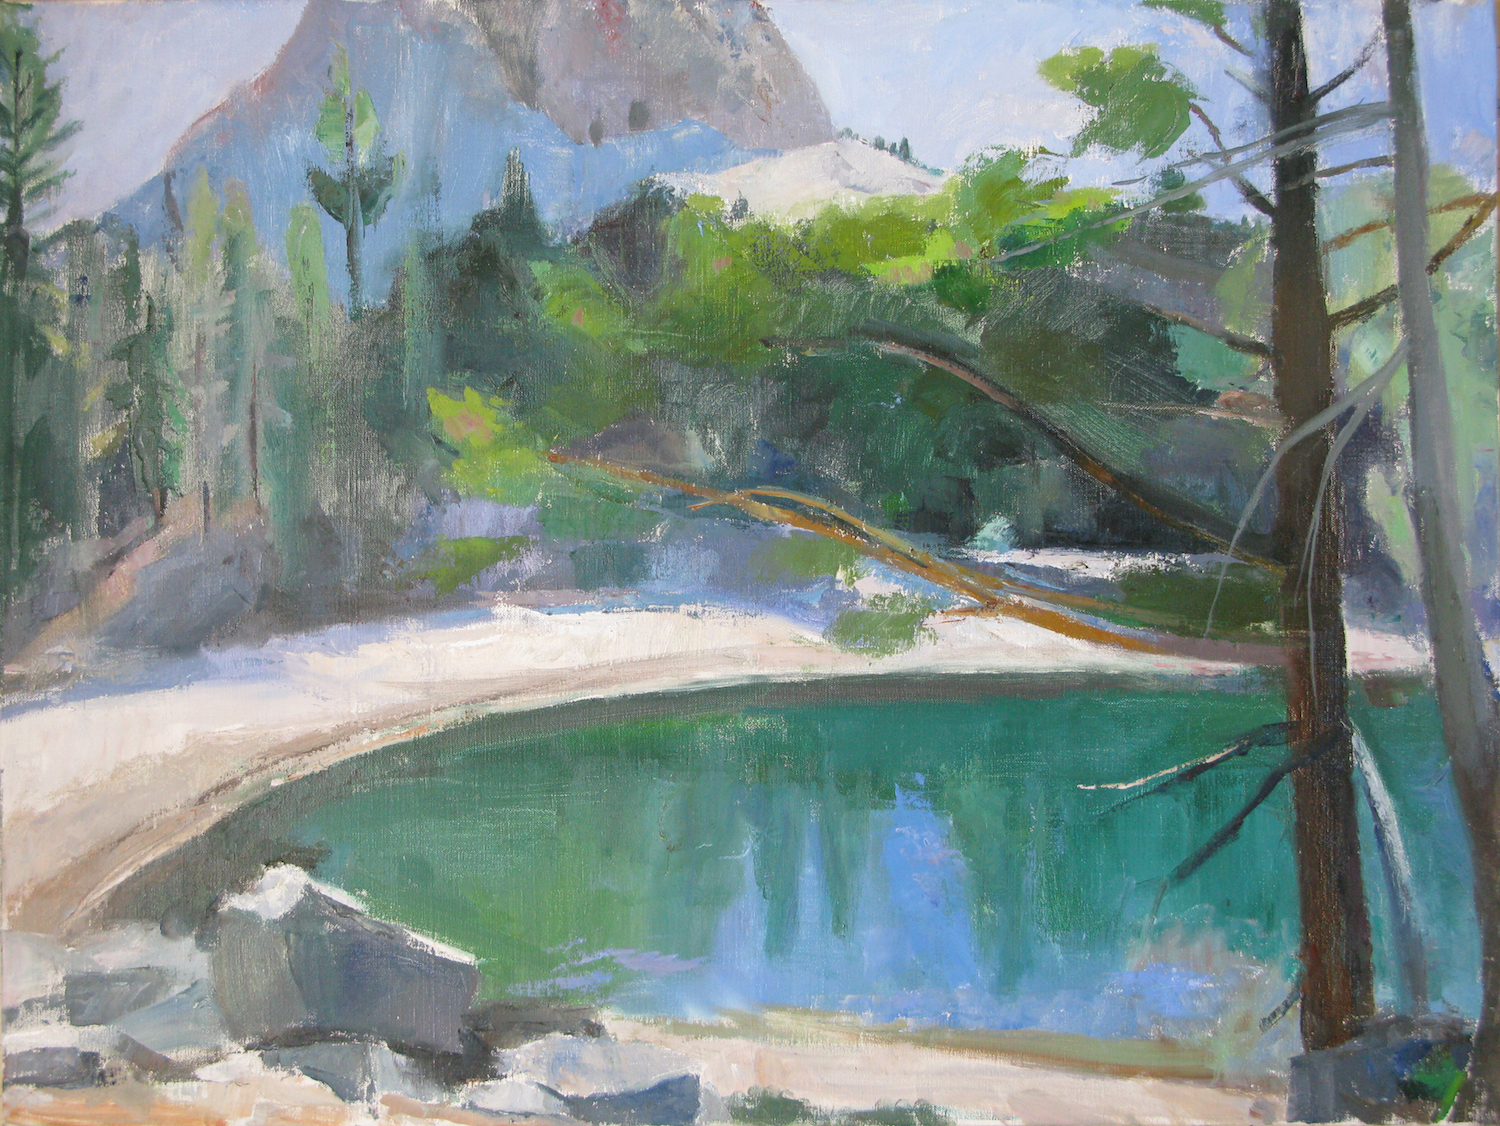 Barrett Lake with Crystal Crag, 24 x 32 inches, oil on linen, 2015.